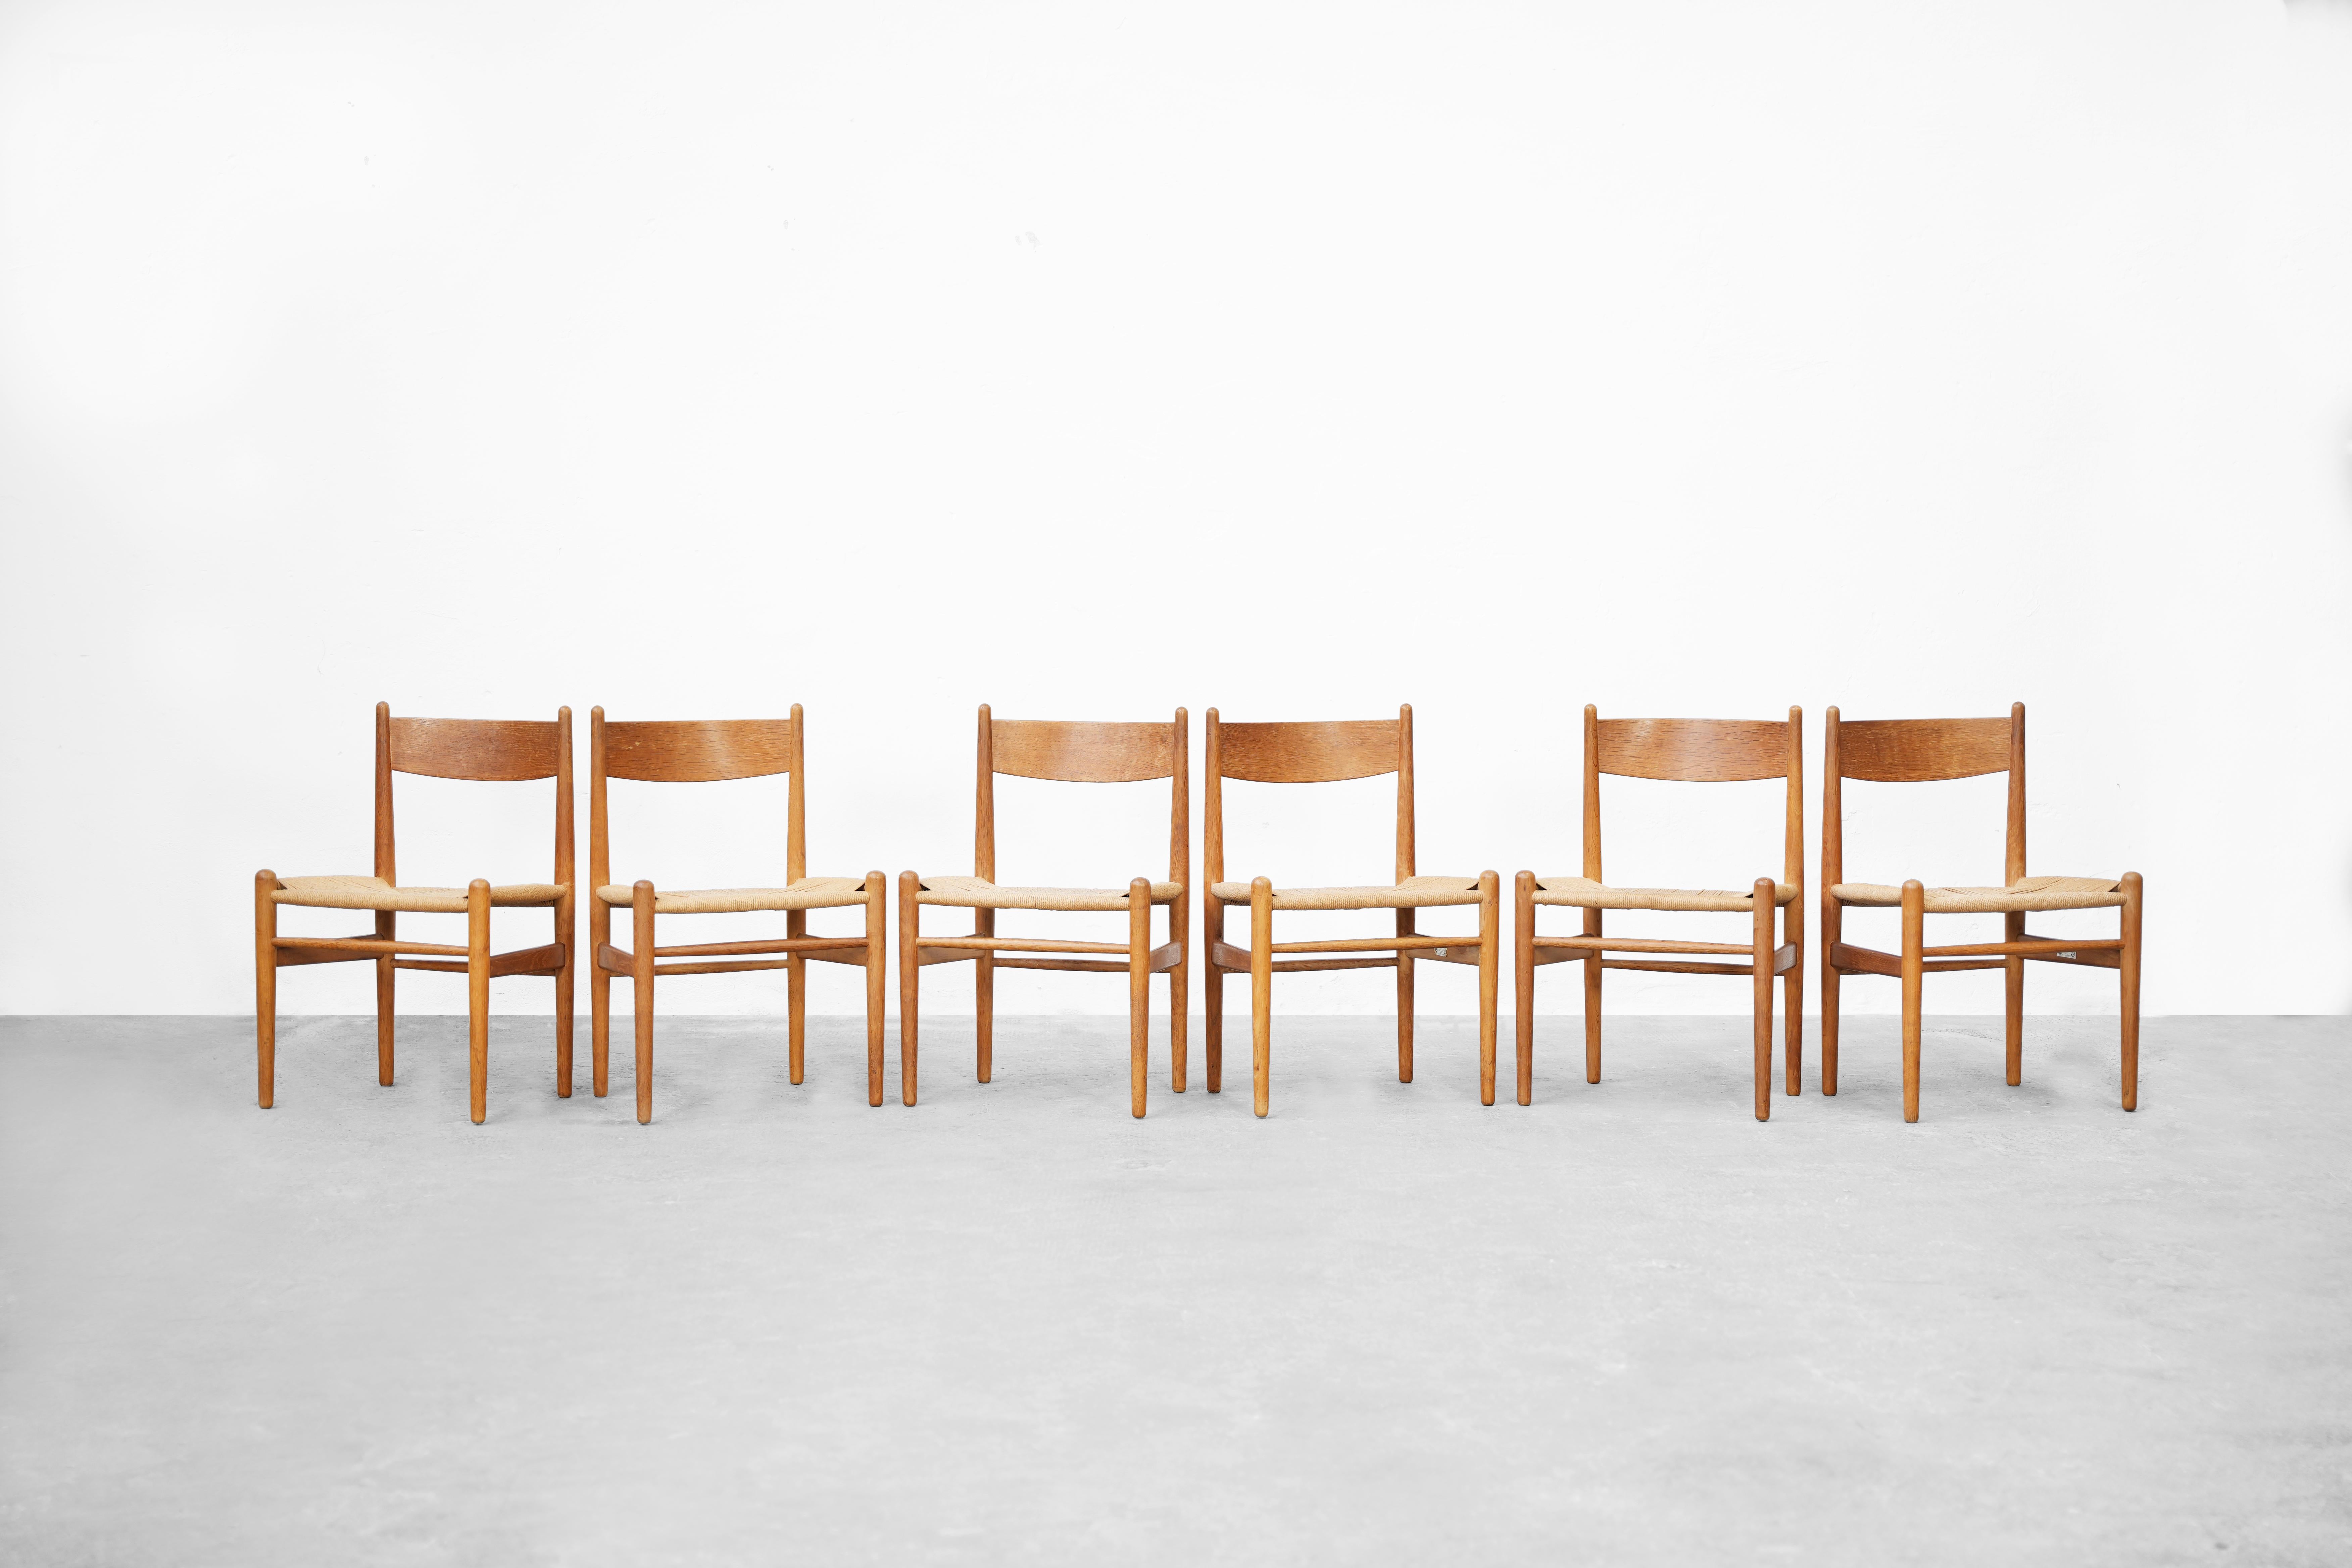 Original and authentic set of six dining chairs Mod. CH36 by Hans J. Wegner and produced by the Danish manufacturer Carl Hansen in the 1960ies.
The chairs are in very good condition with beautifully patinated oak frames. All six chairs are original